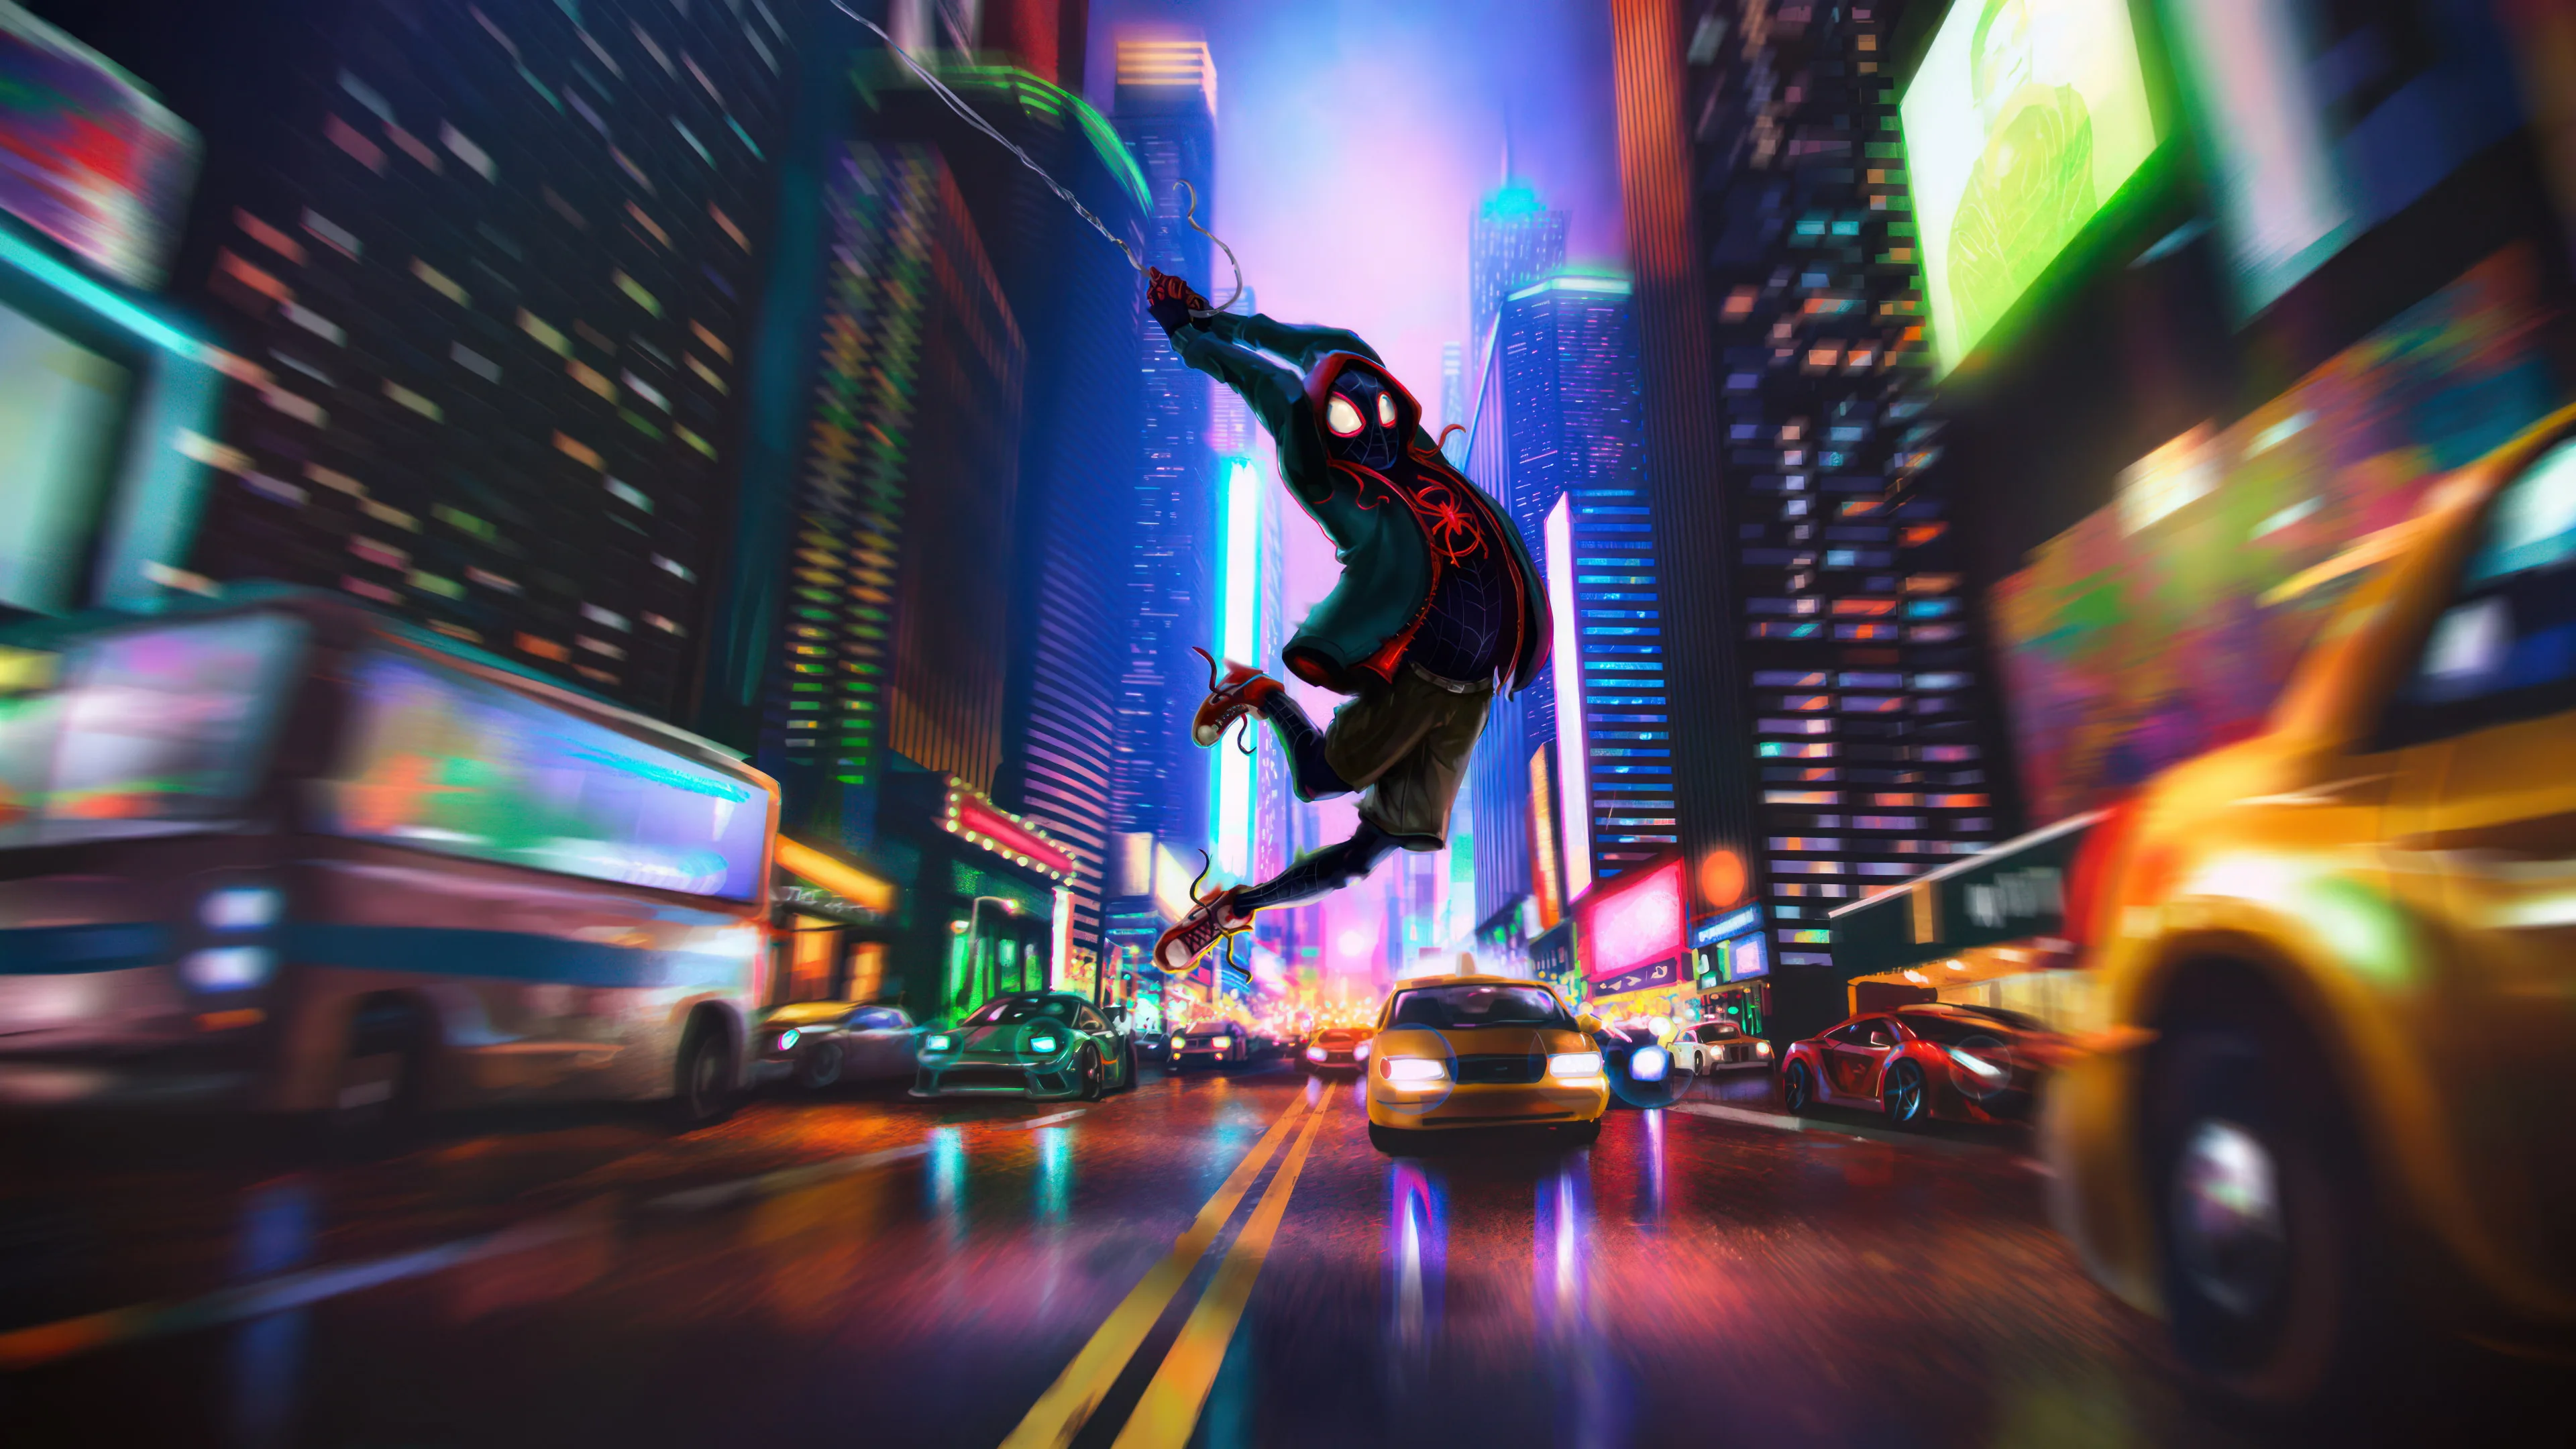 Wallpaper  Spider Man Into the Spider Verse Spider Man Miles Morales  movies city falling vertical 1440x2960  pp12016  1911309  HD  Wallpapers  WallHere